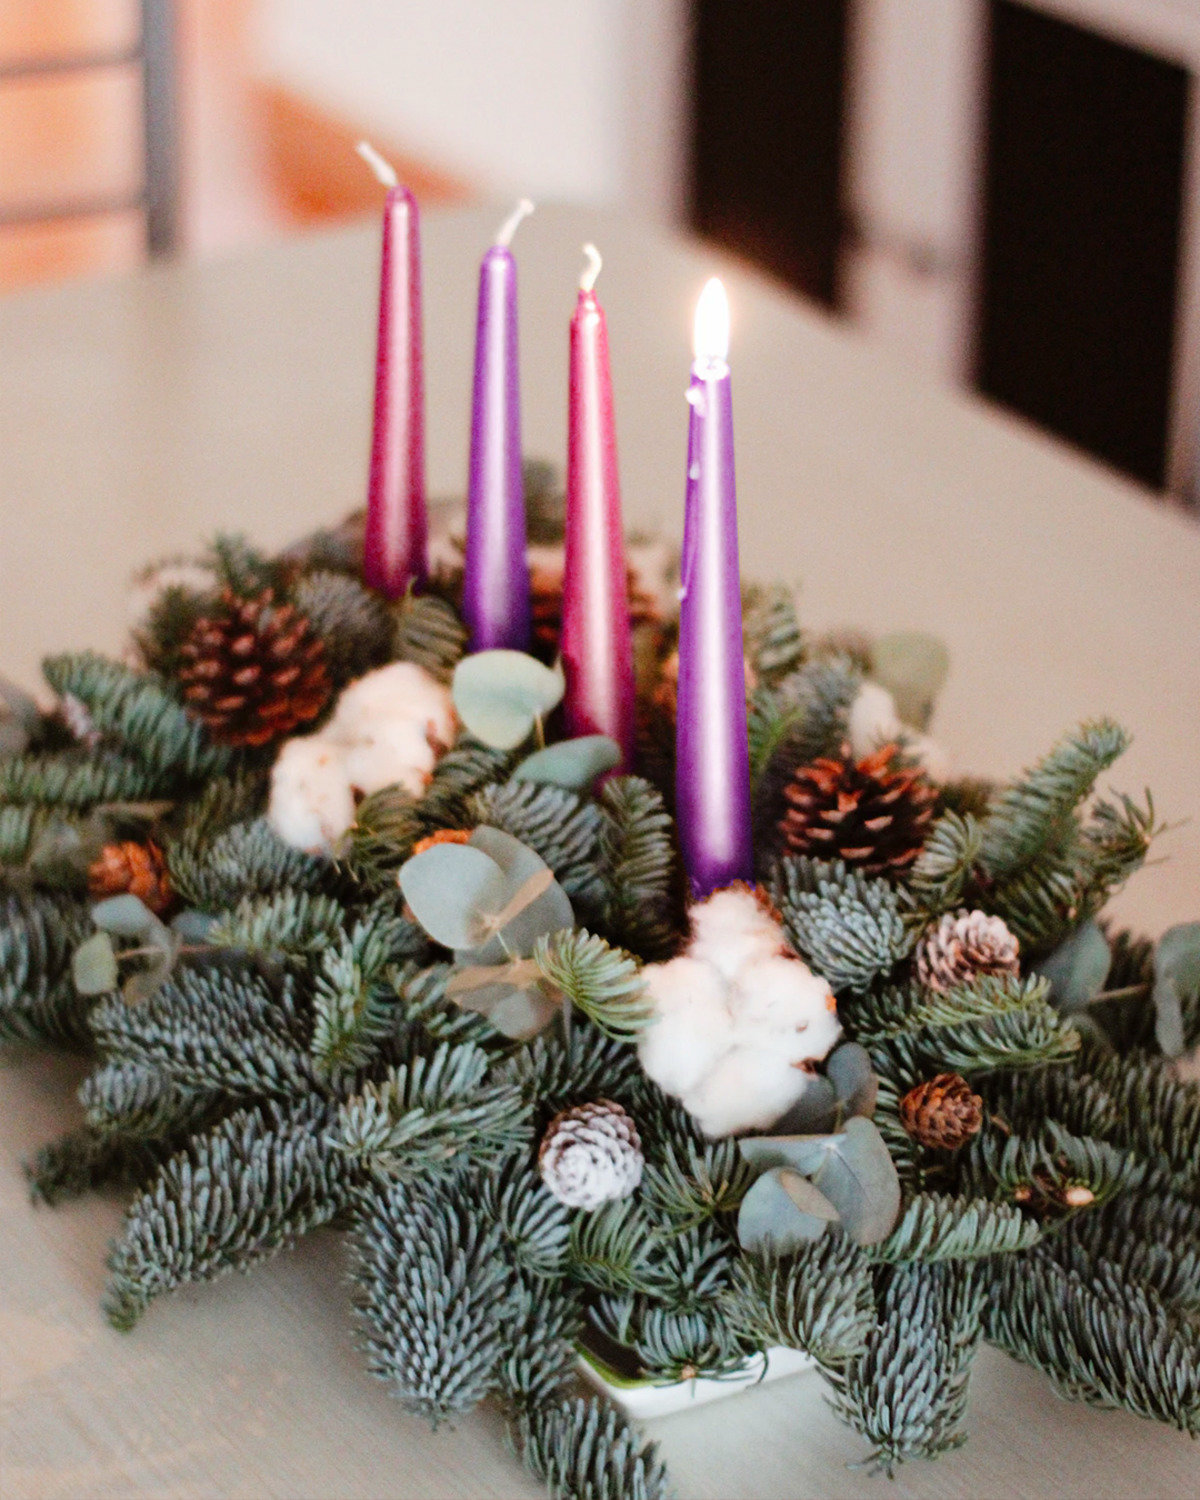 How To Make A Meaningful Advent Wreath - St. Monica